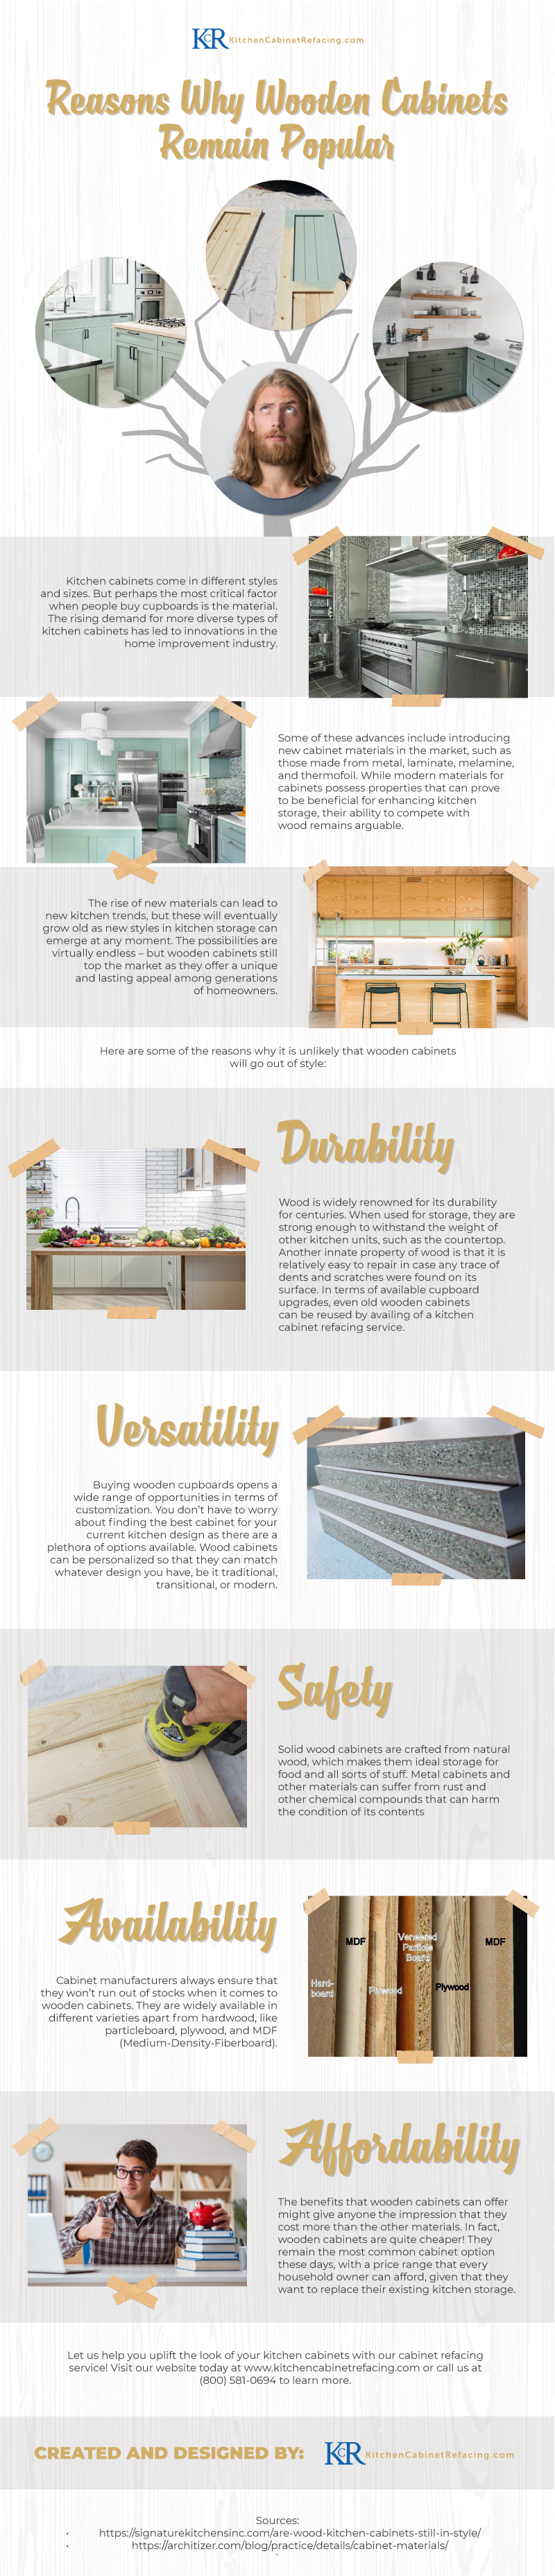 Reasons_Why_Wooden_Cabinets_Remain_Popular_infographic_image